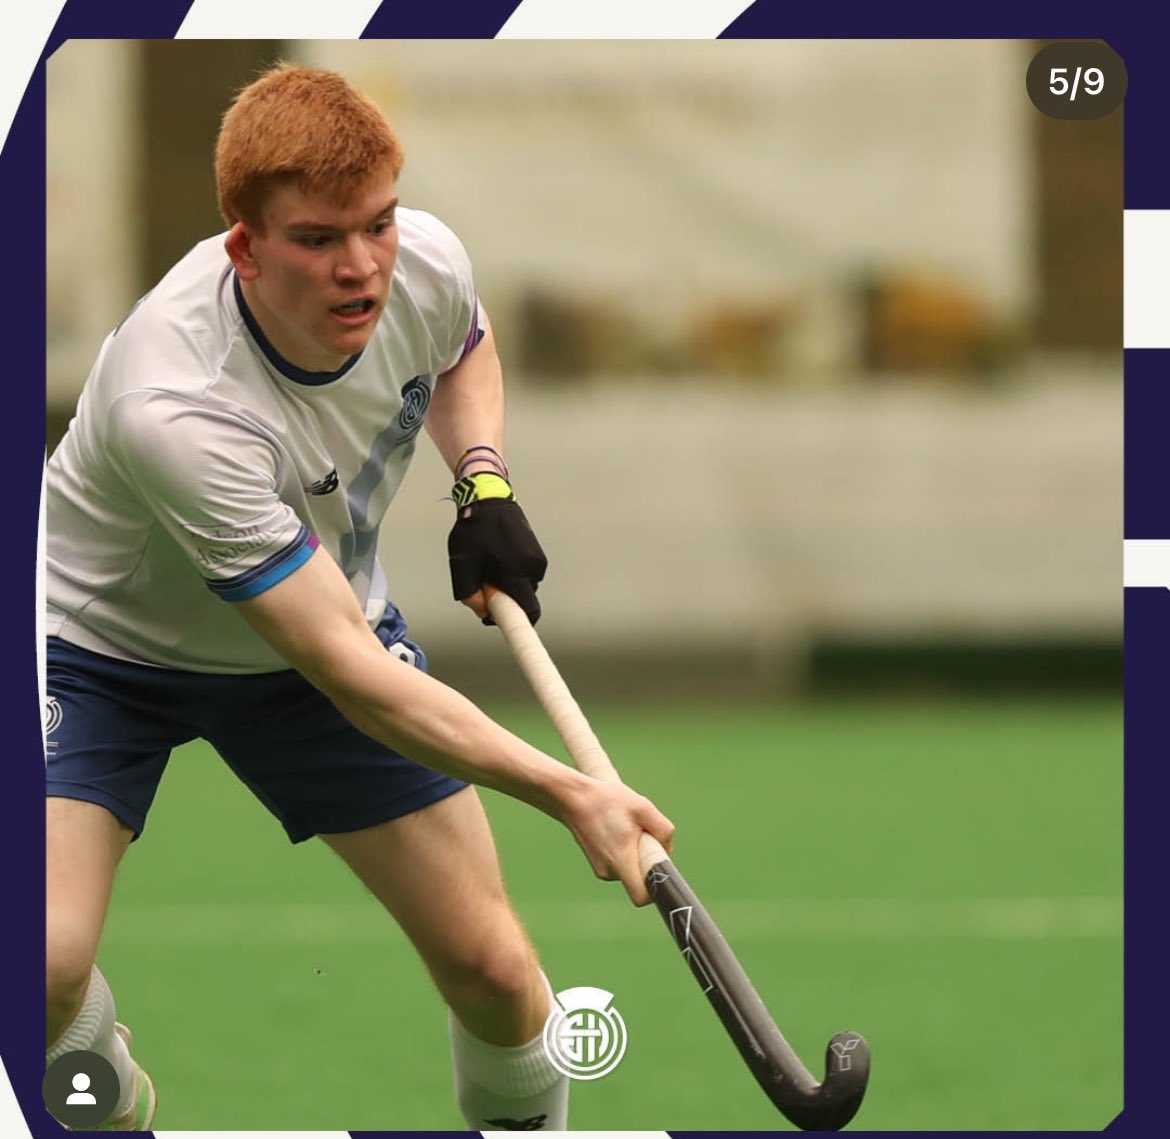 Congratulations to Jack, Ed, Marianna and Cody who have all been playing for @ScottishHockey this Easter. Cody scored today against France U16s. Jack & Ed had a close game to end the week with a 3-3 vs Ireland U18s. Marianna ended a great weekend with a tough game vs Germany U18s